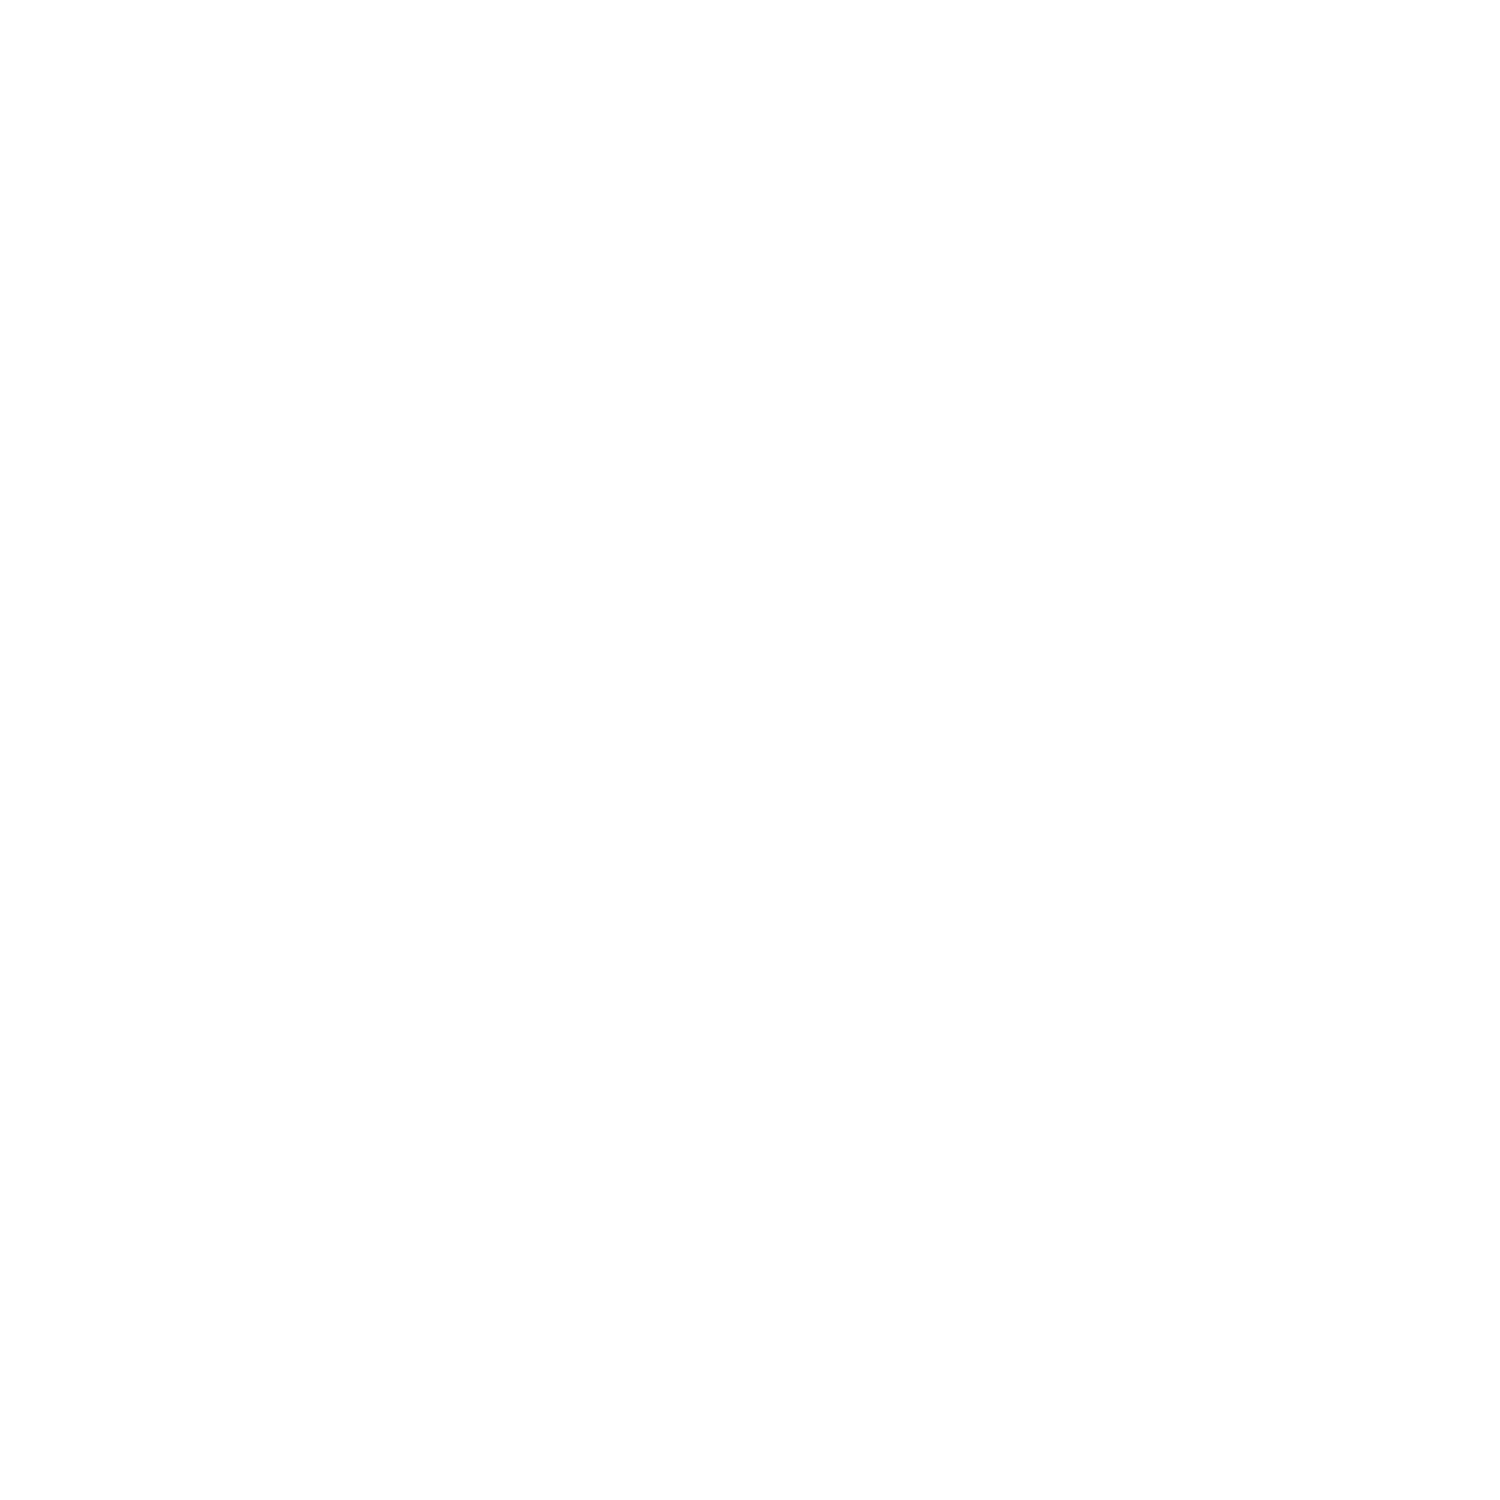 Away She Goes Photography